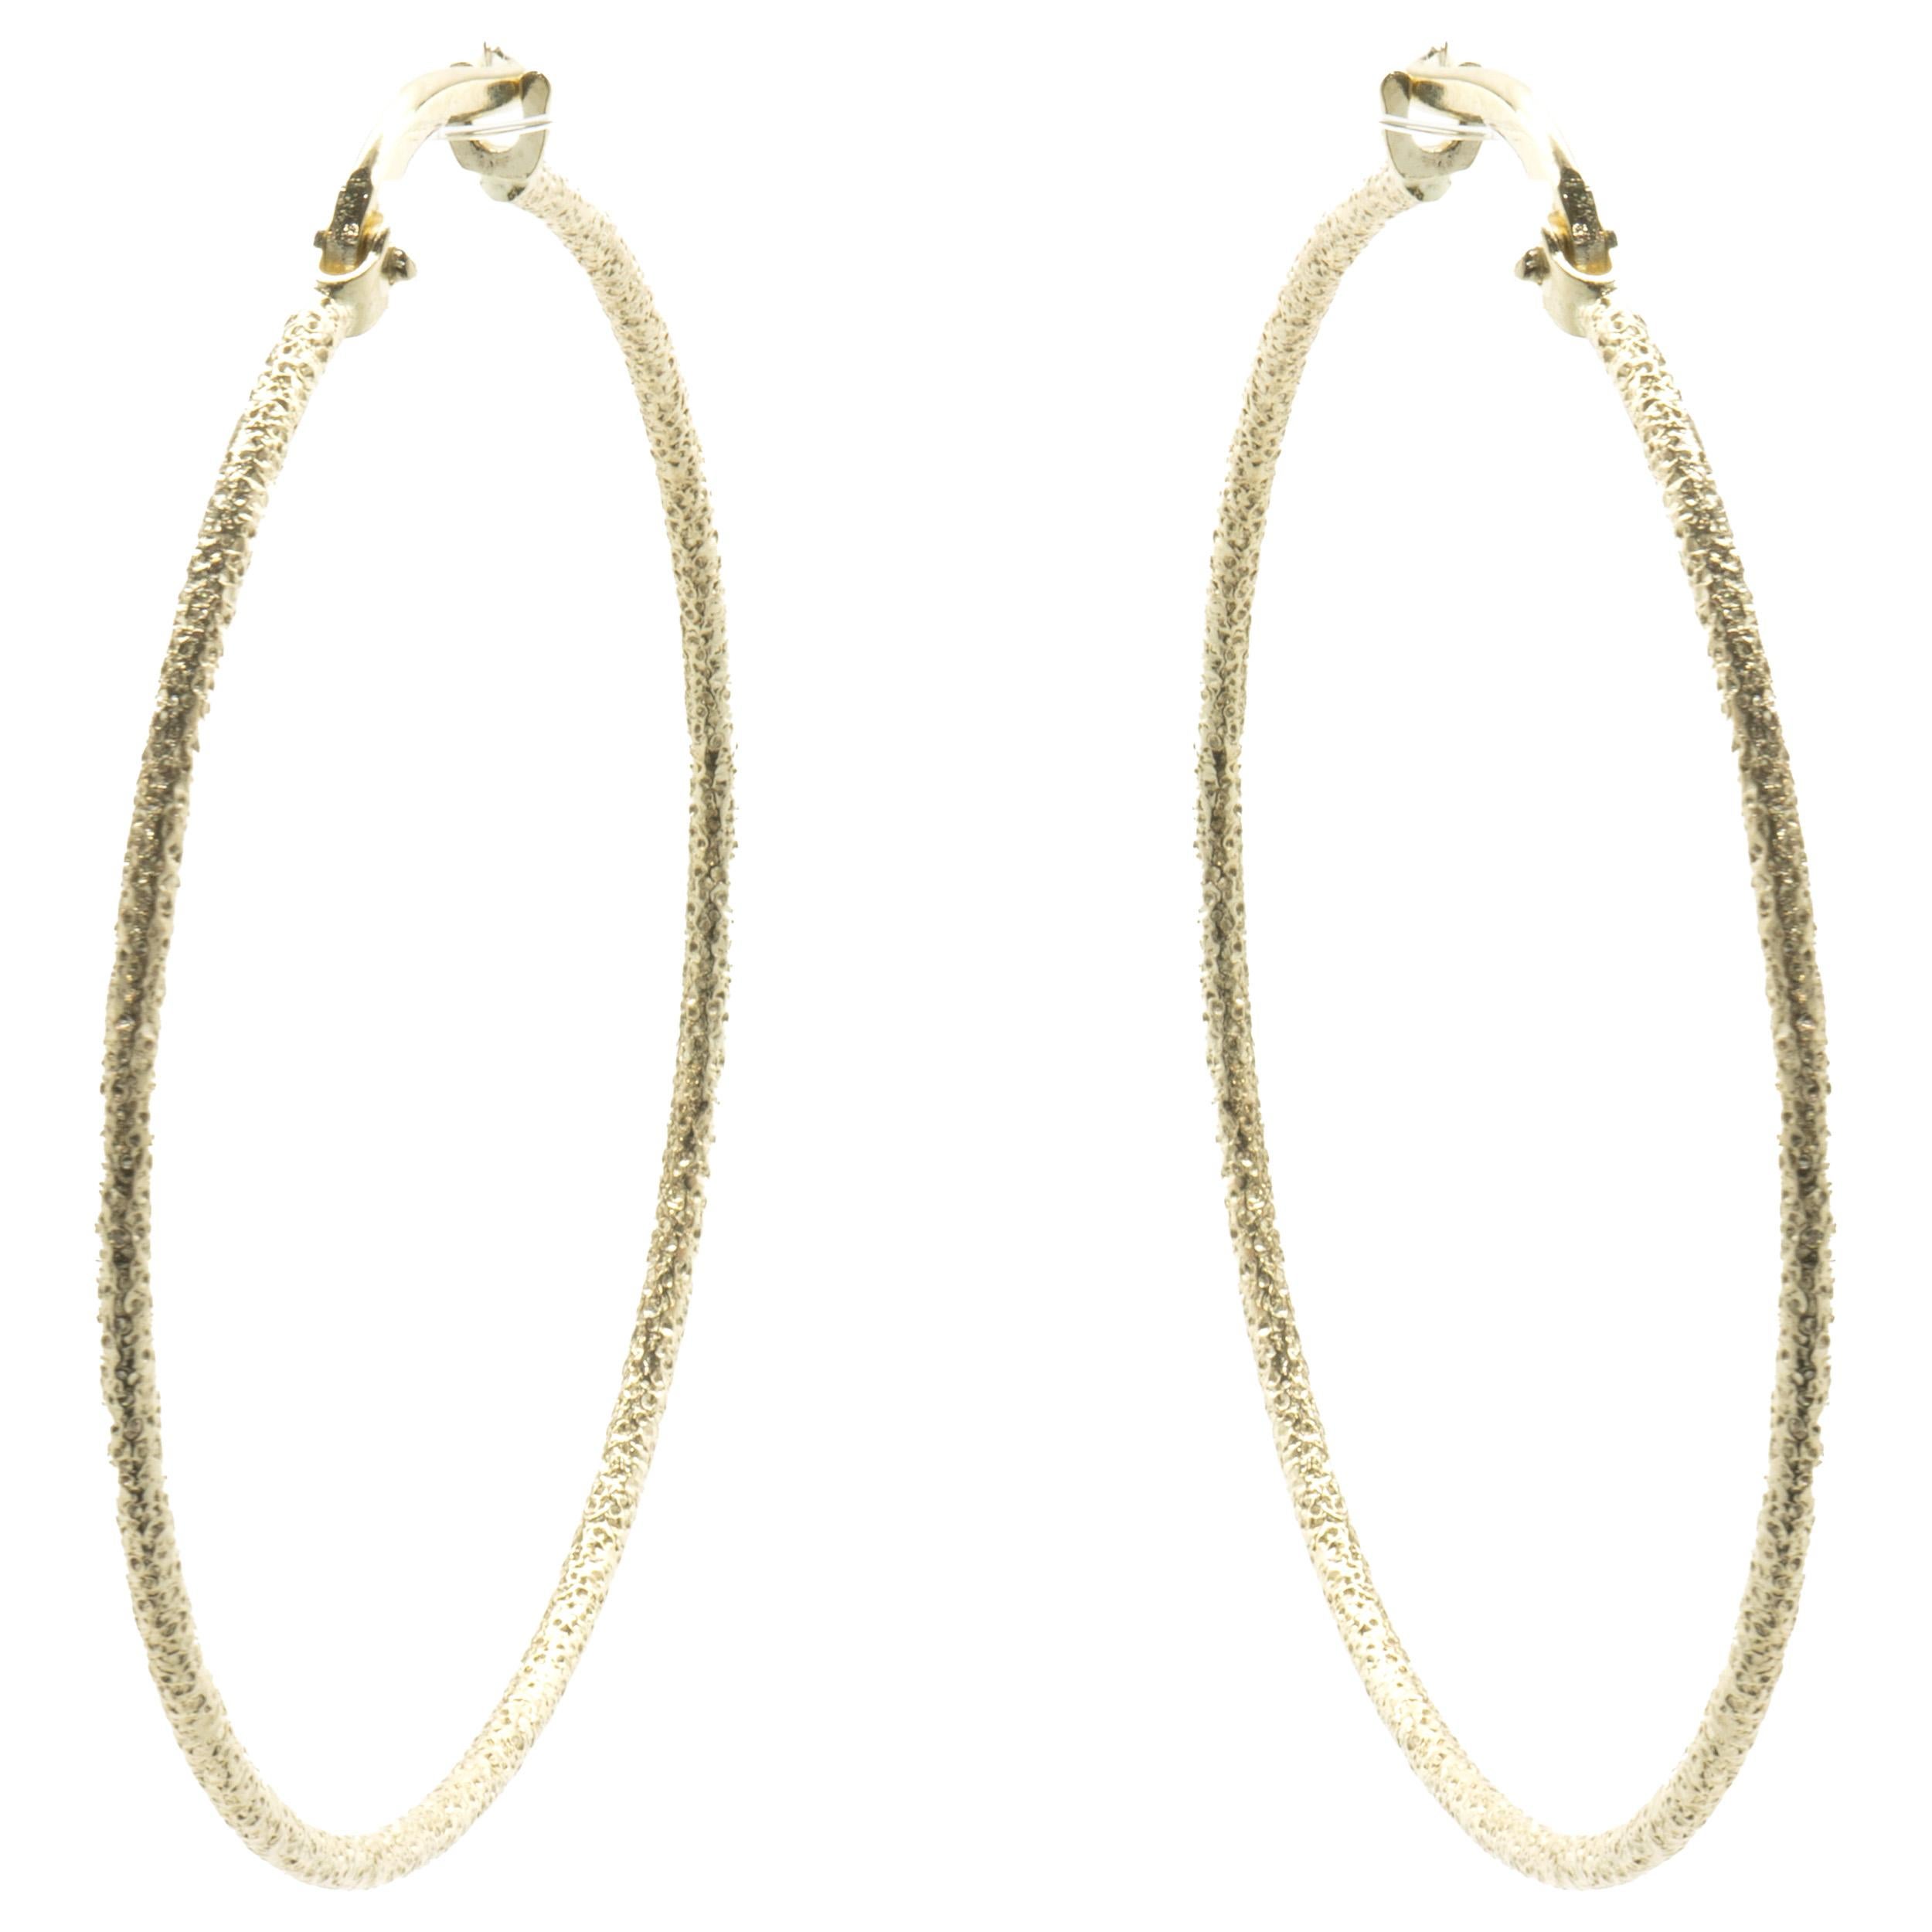 14 Karat Yellow Gold Textured Hoop Earrings In Excellent Condition For Sale In Scottsdale, AZ